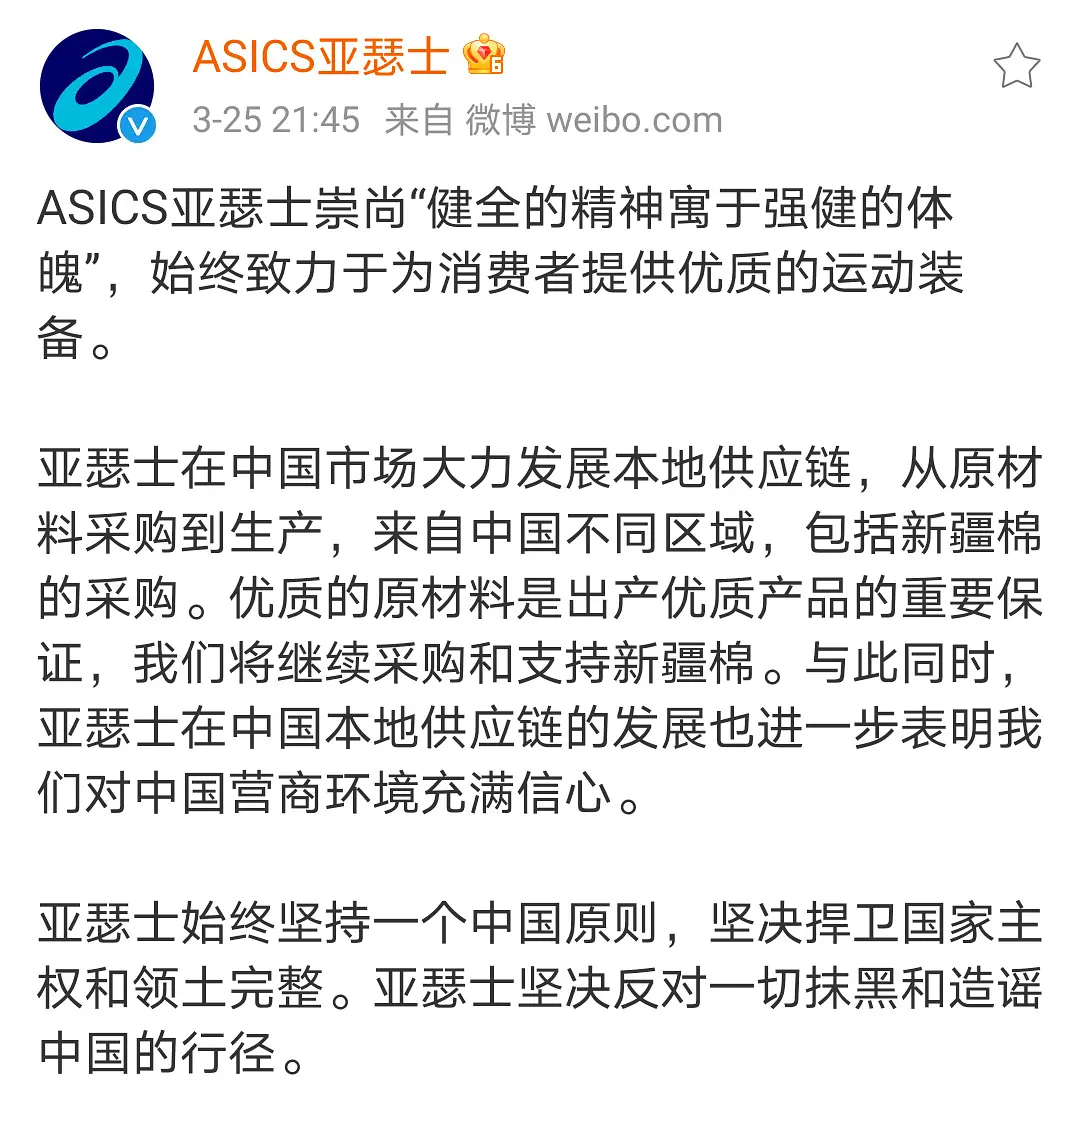 Tide of star end an agreement is follow-up: Brand share price drops greatly, BCI China area declares where one stands, 3 know Song cutout language